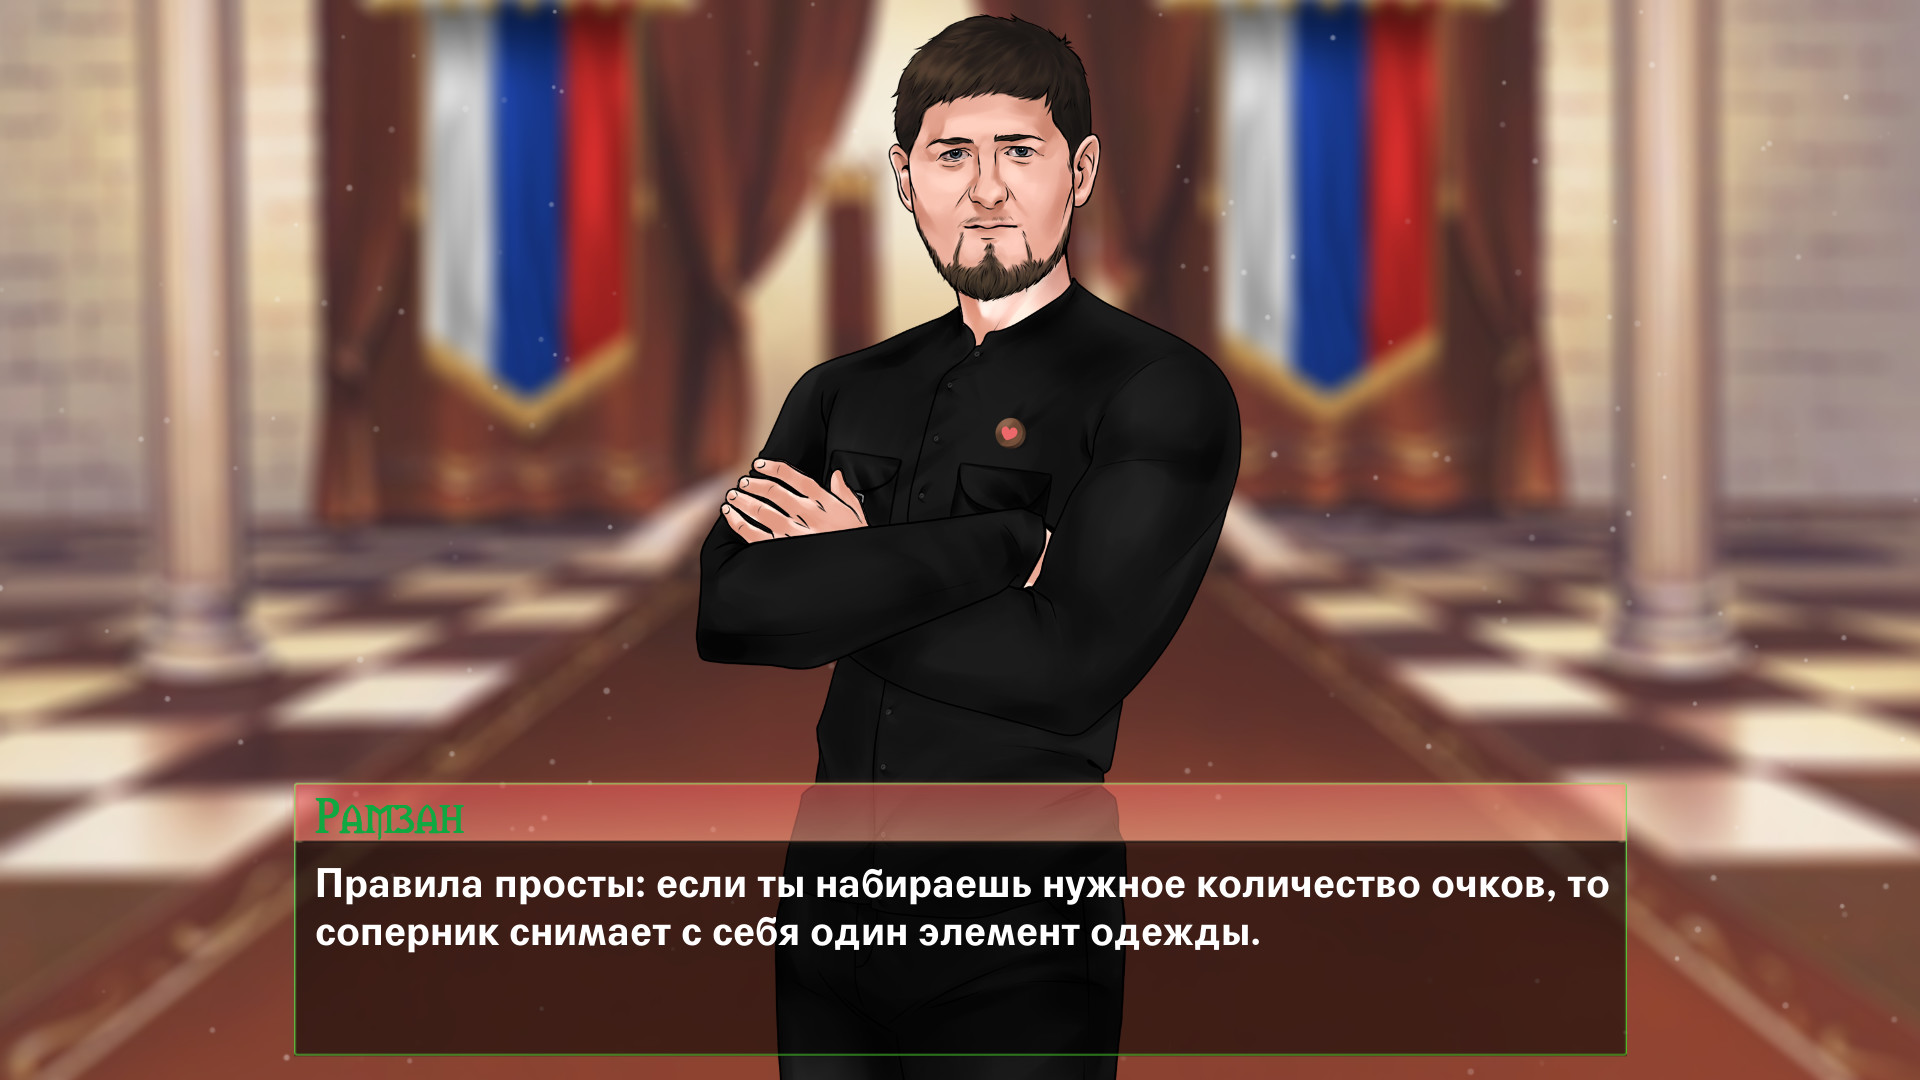 Find the best laptops for Love with Kadyrov